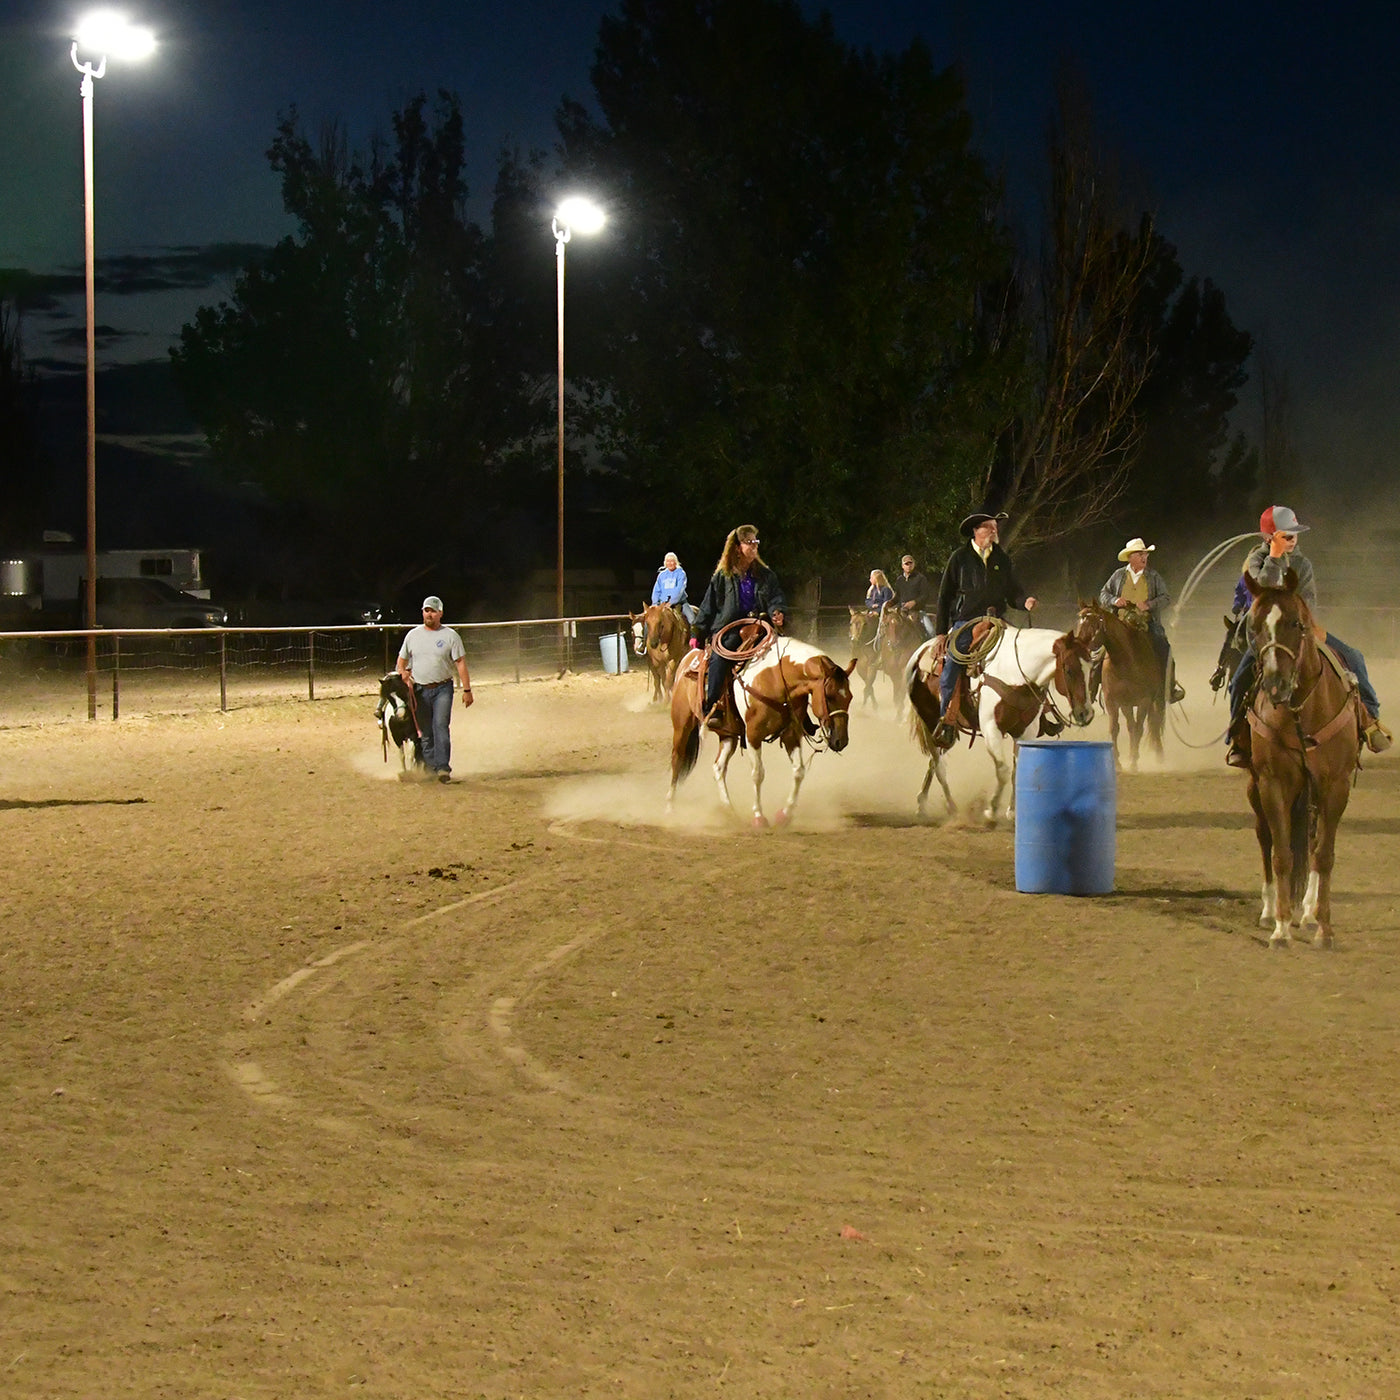 Sports Lighting Brackets for Colorado-Based Equestrian Arena Project